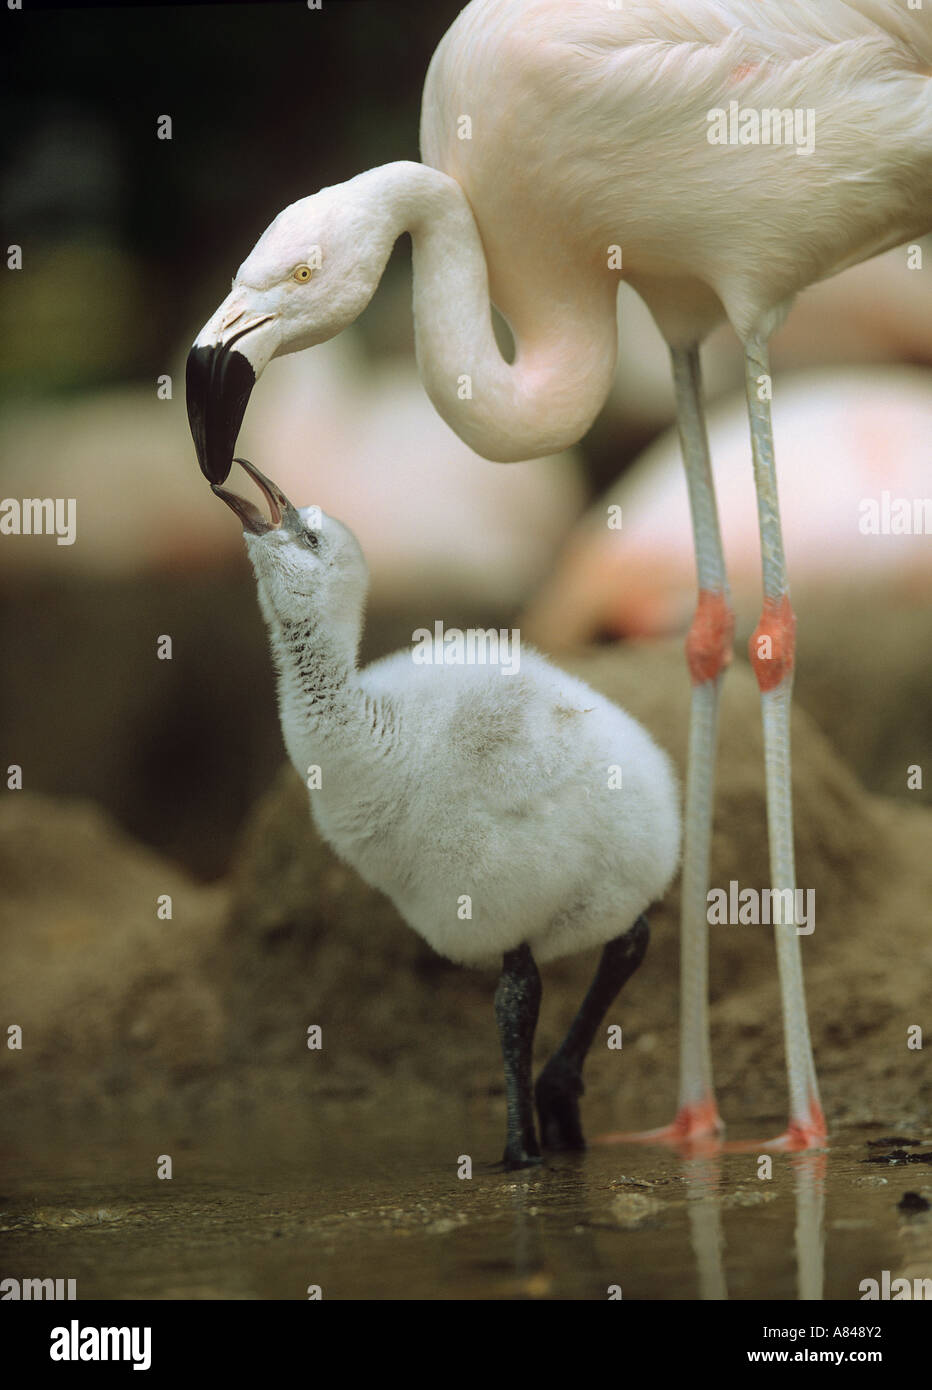 greater flamingo with squab Phoenicopterus ruber Stock Photo